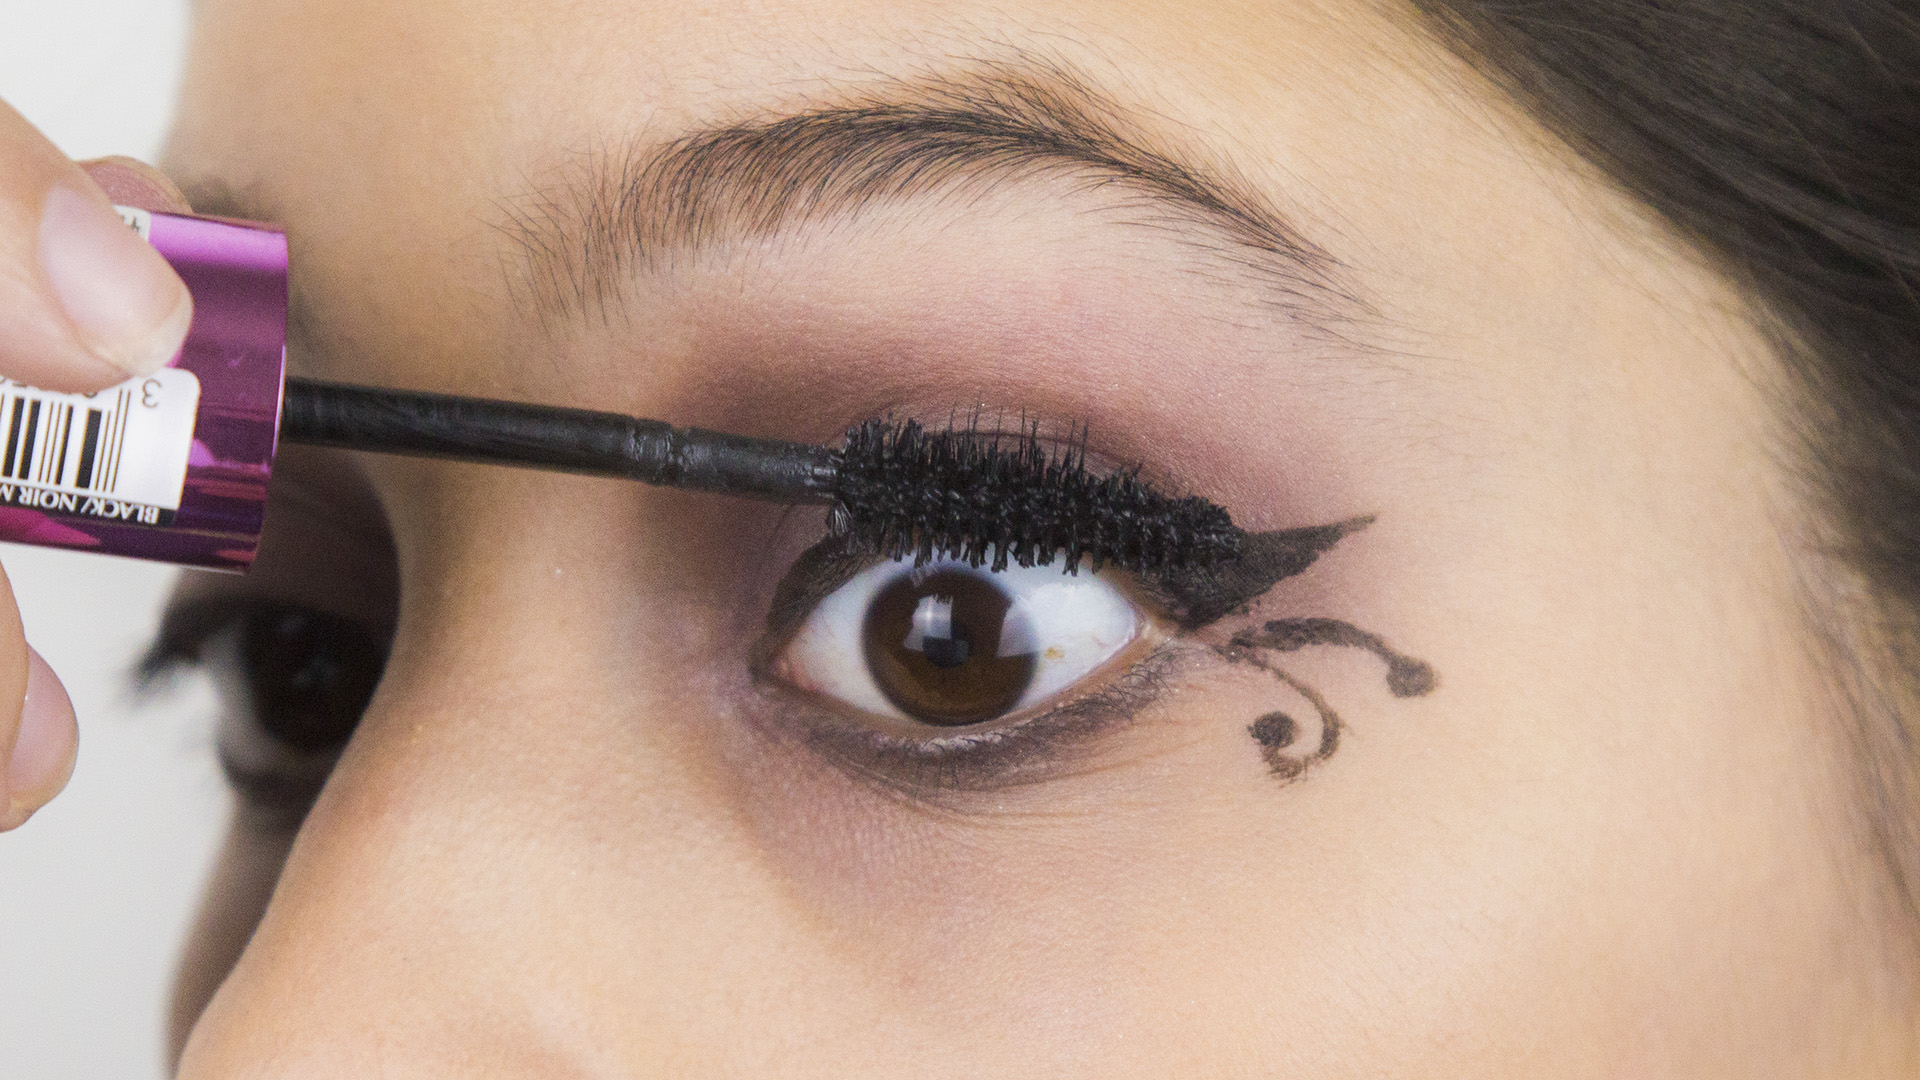 How To Apply Eye Makeup With Pictures 3 Ways To Apply Gothic Eye Makeup Wikihow